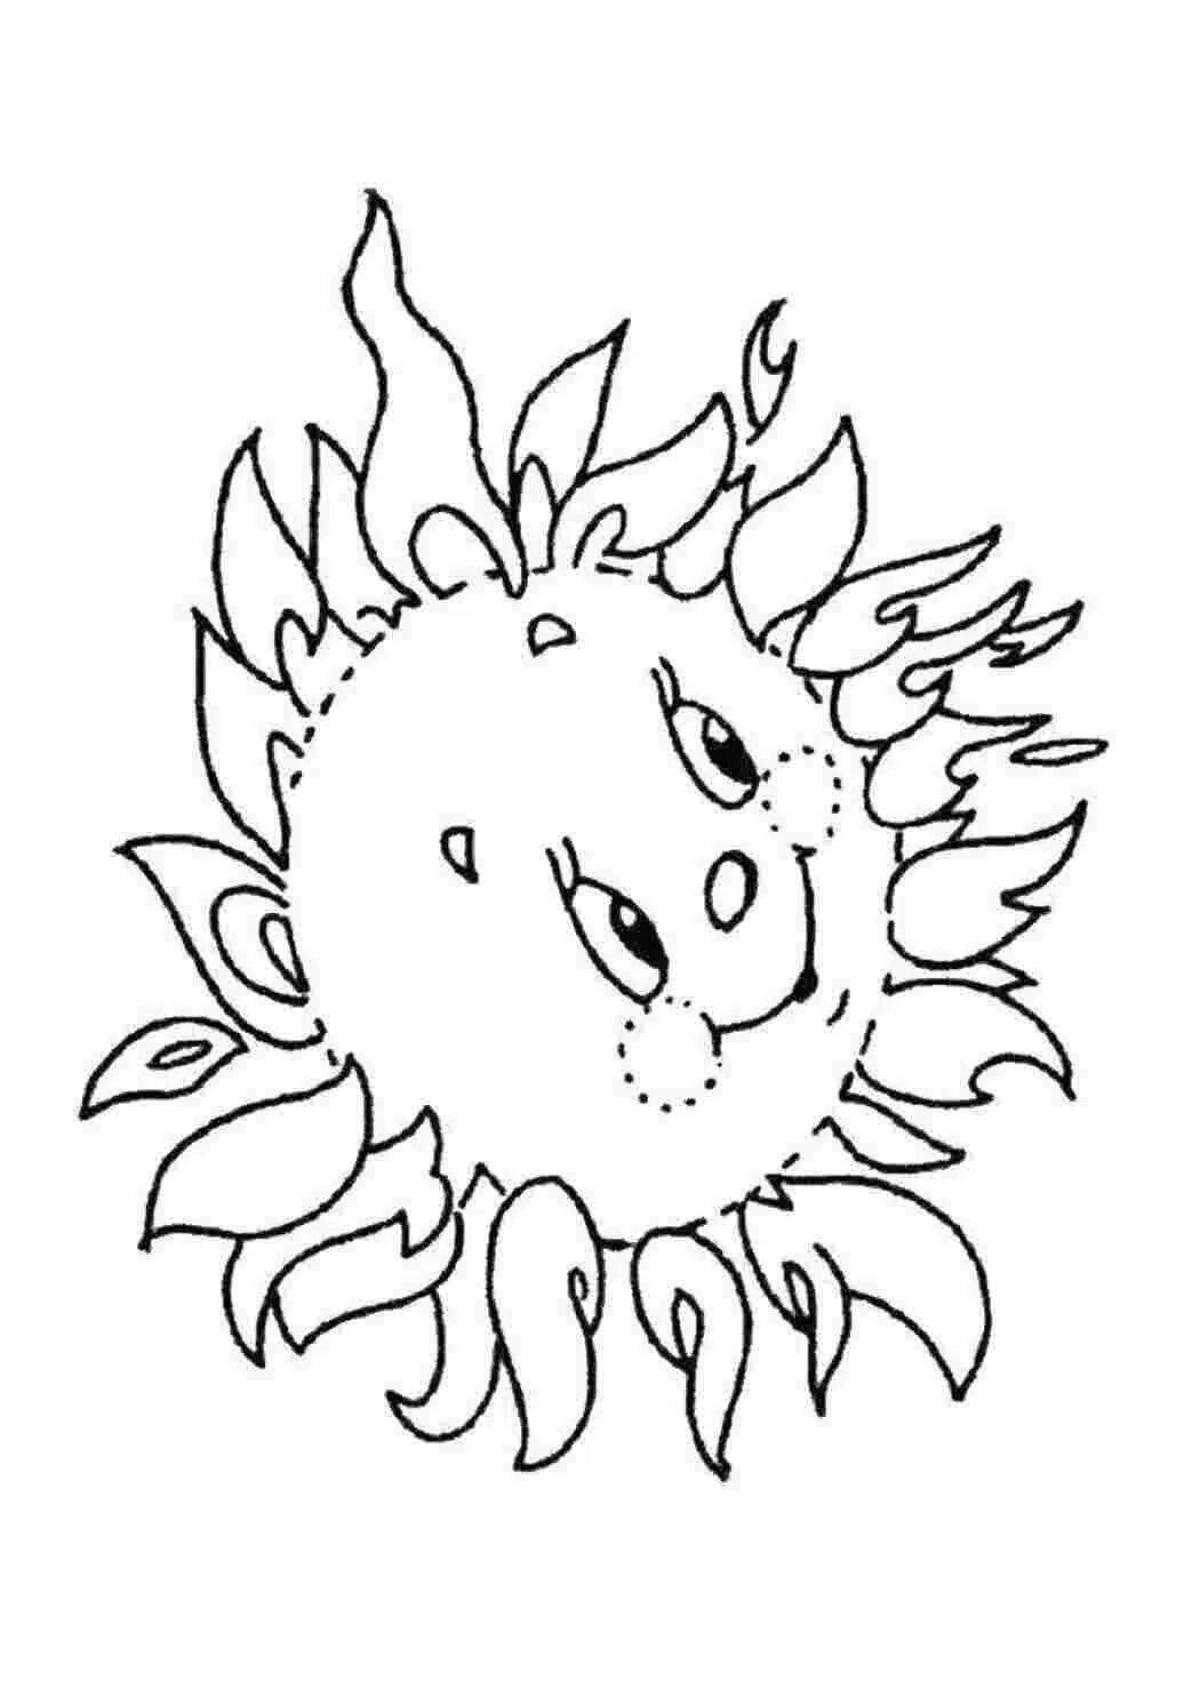 Glamorous sun coloring for kids